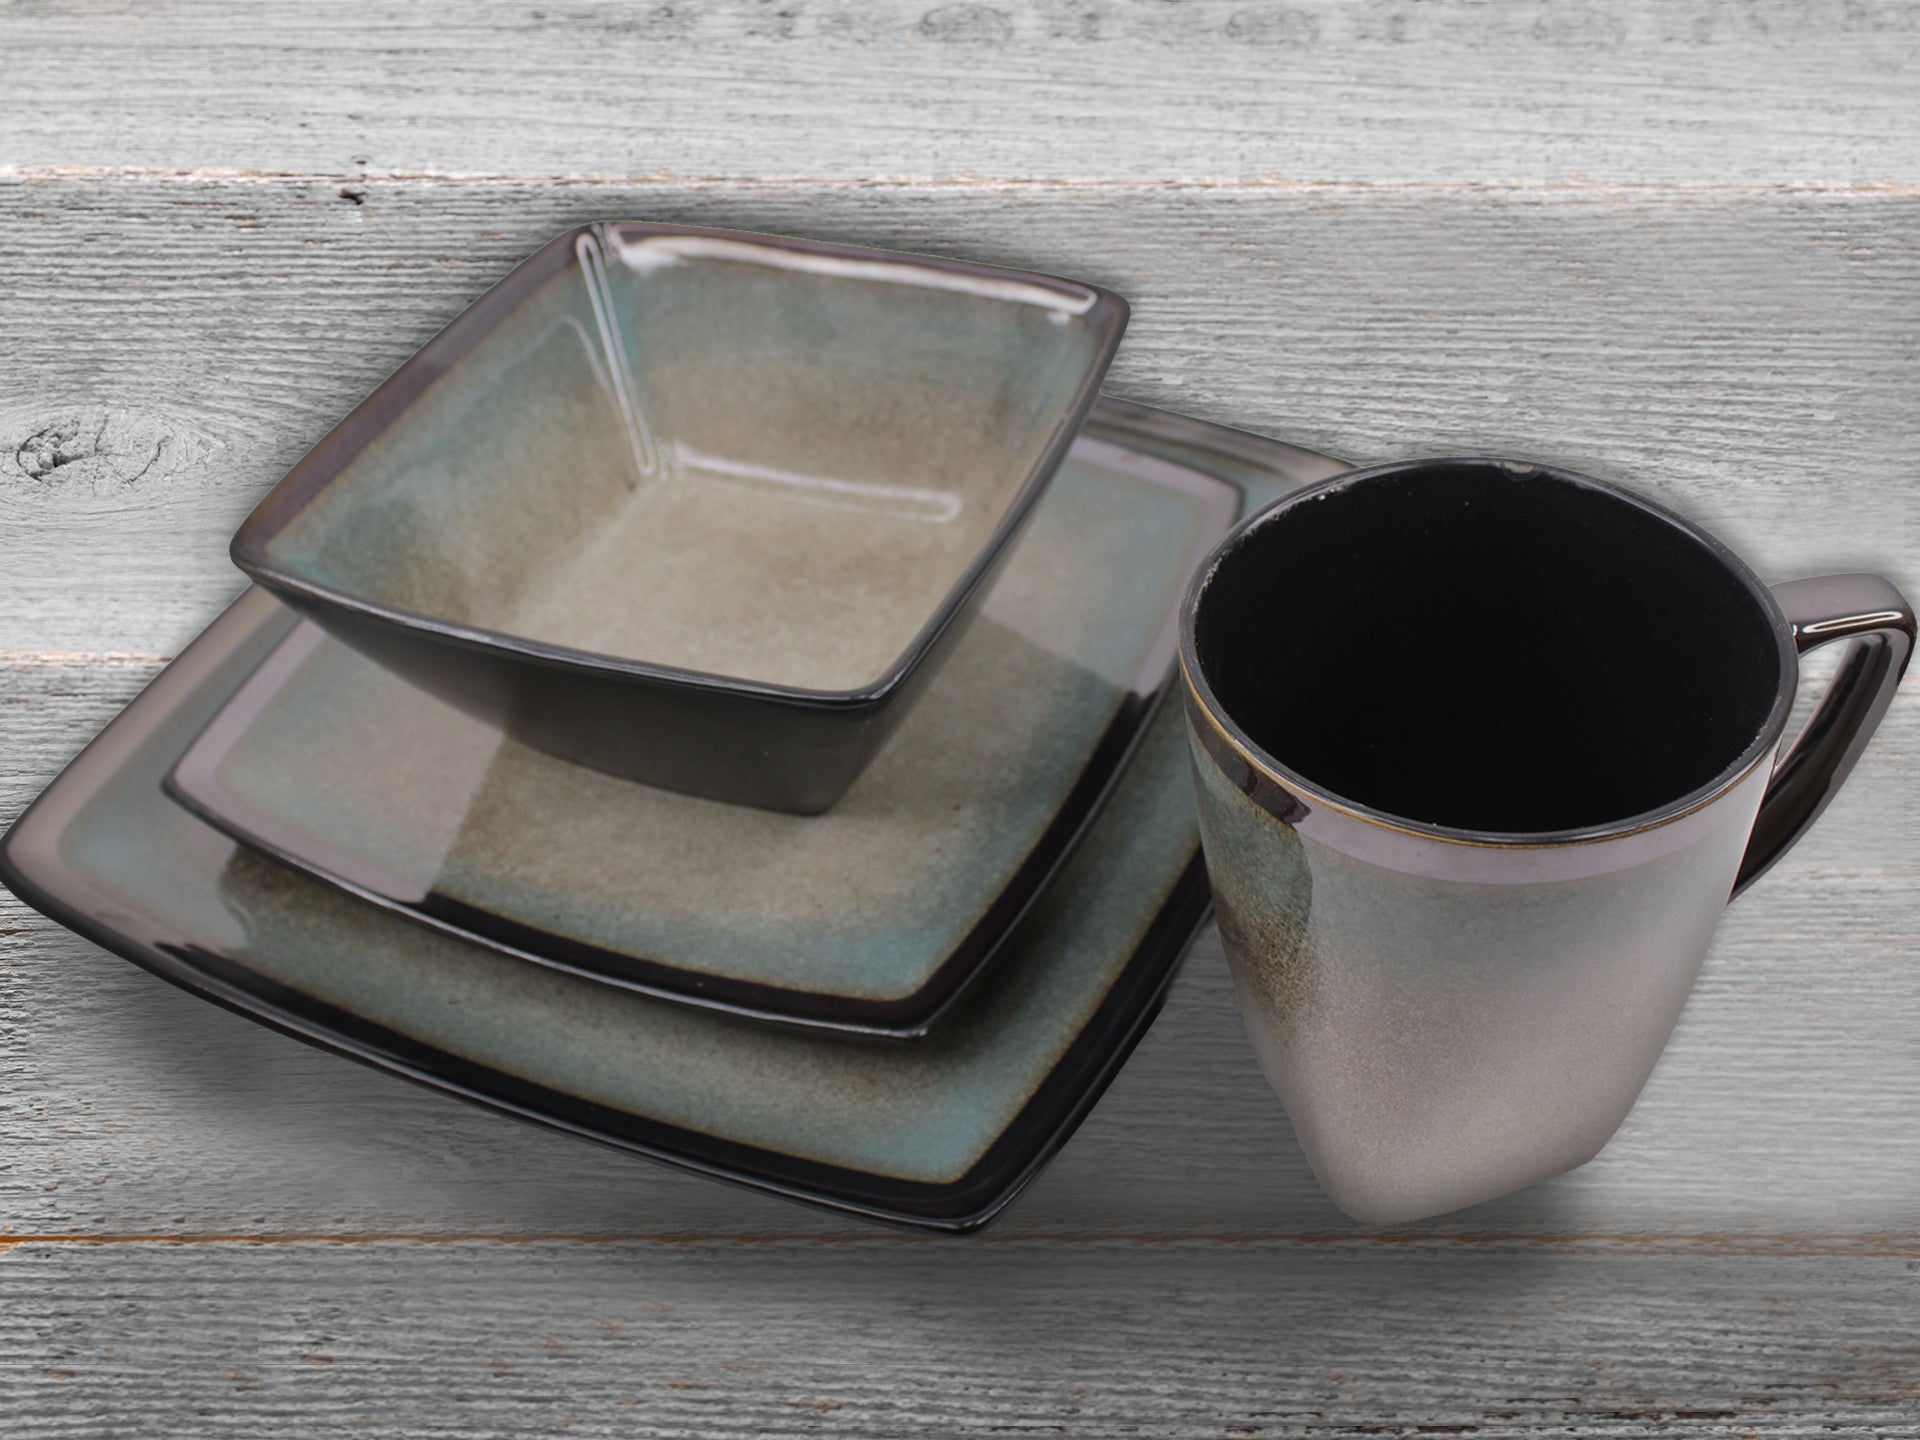 16 Piece Couture Banded Border Square Stoneware Dinner Set - Reactive Cream-Blue